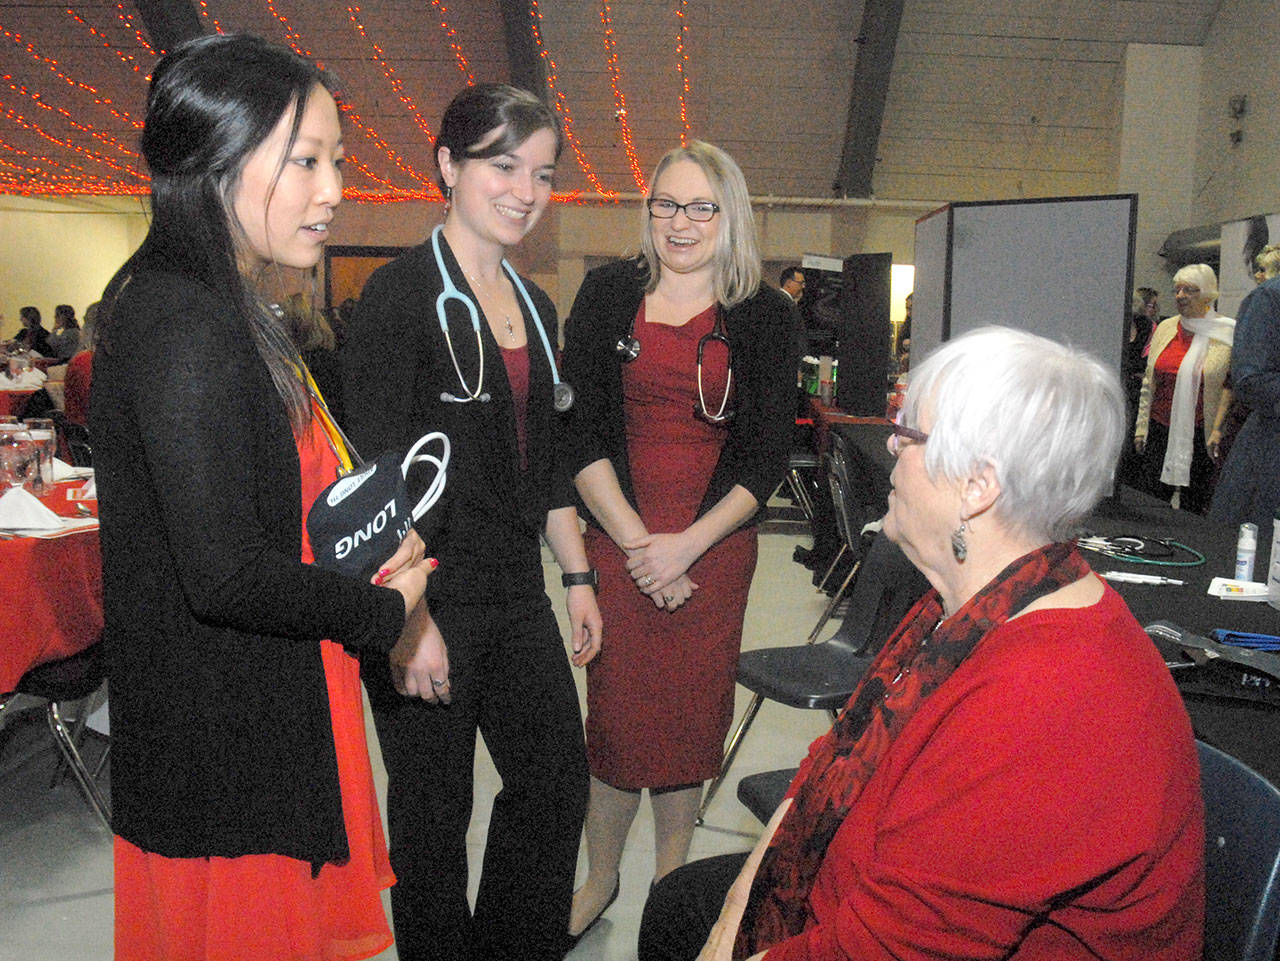 Keith Thorpe/Peninsula Daily News Olympic Medical Center workers, from left, exercise specialist Sherry Xiong, nuclear medical technician Brittany Payseno and cardiac sonographer Kerie Swegle talk with guest Dee Kurtz before the start of Friday’s 11th annual Red, Set, Go! Heart Luncheon at Vern Burton Community Center in Port Angeles. The charity event, hosted by the Jamestown S’Klallam Tribe, benefitted the Olympic Medical Center Foundation with goal of raising funds toward the purchase of a nuclear camera for cardiac stress testing.